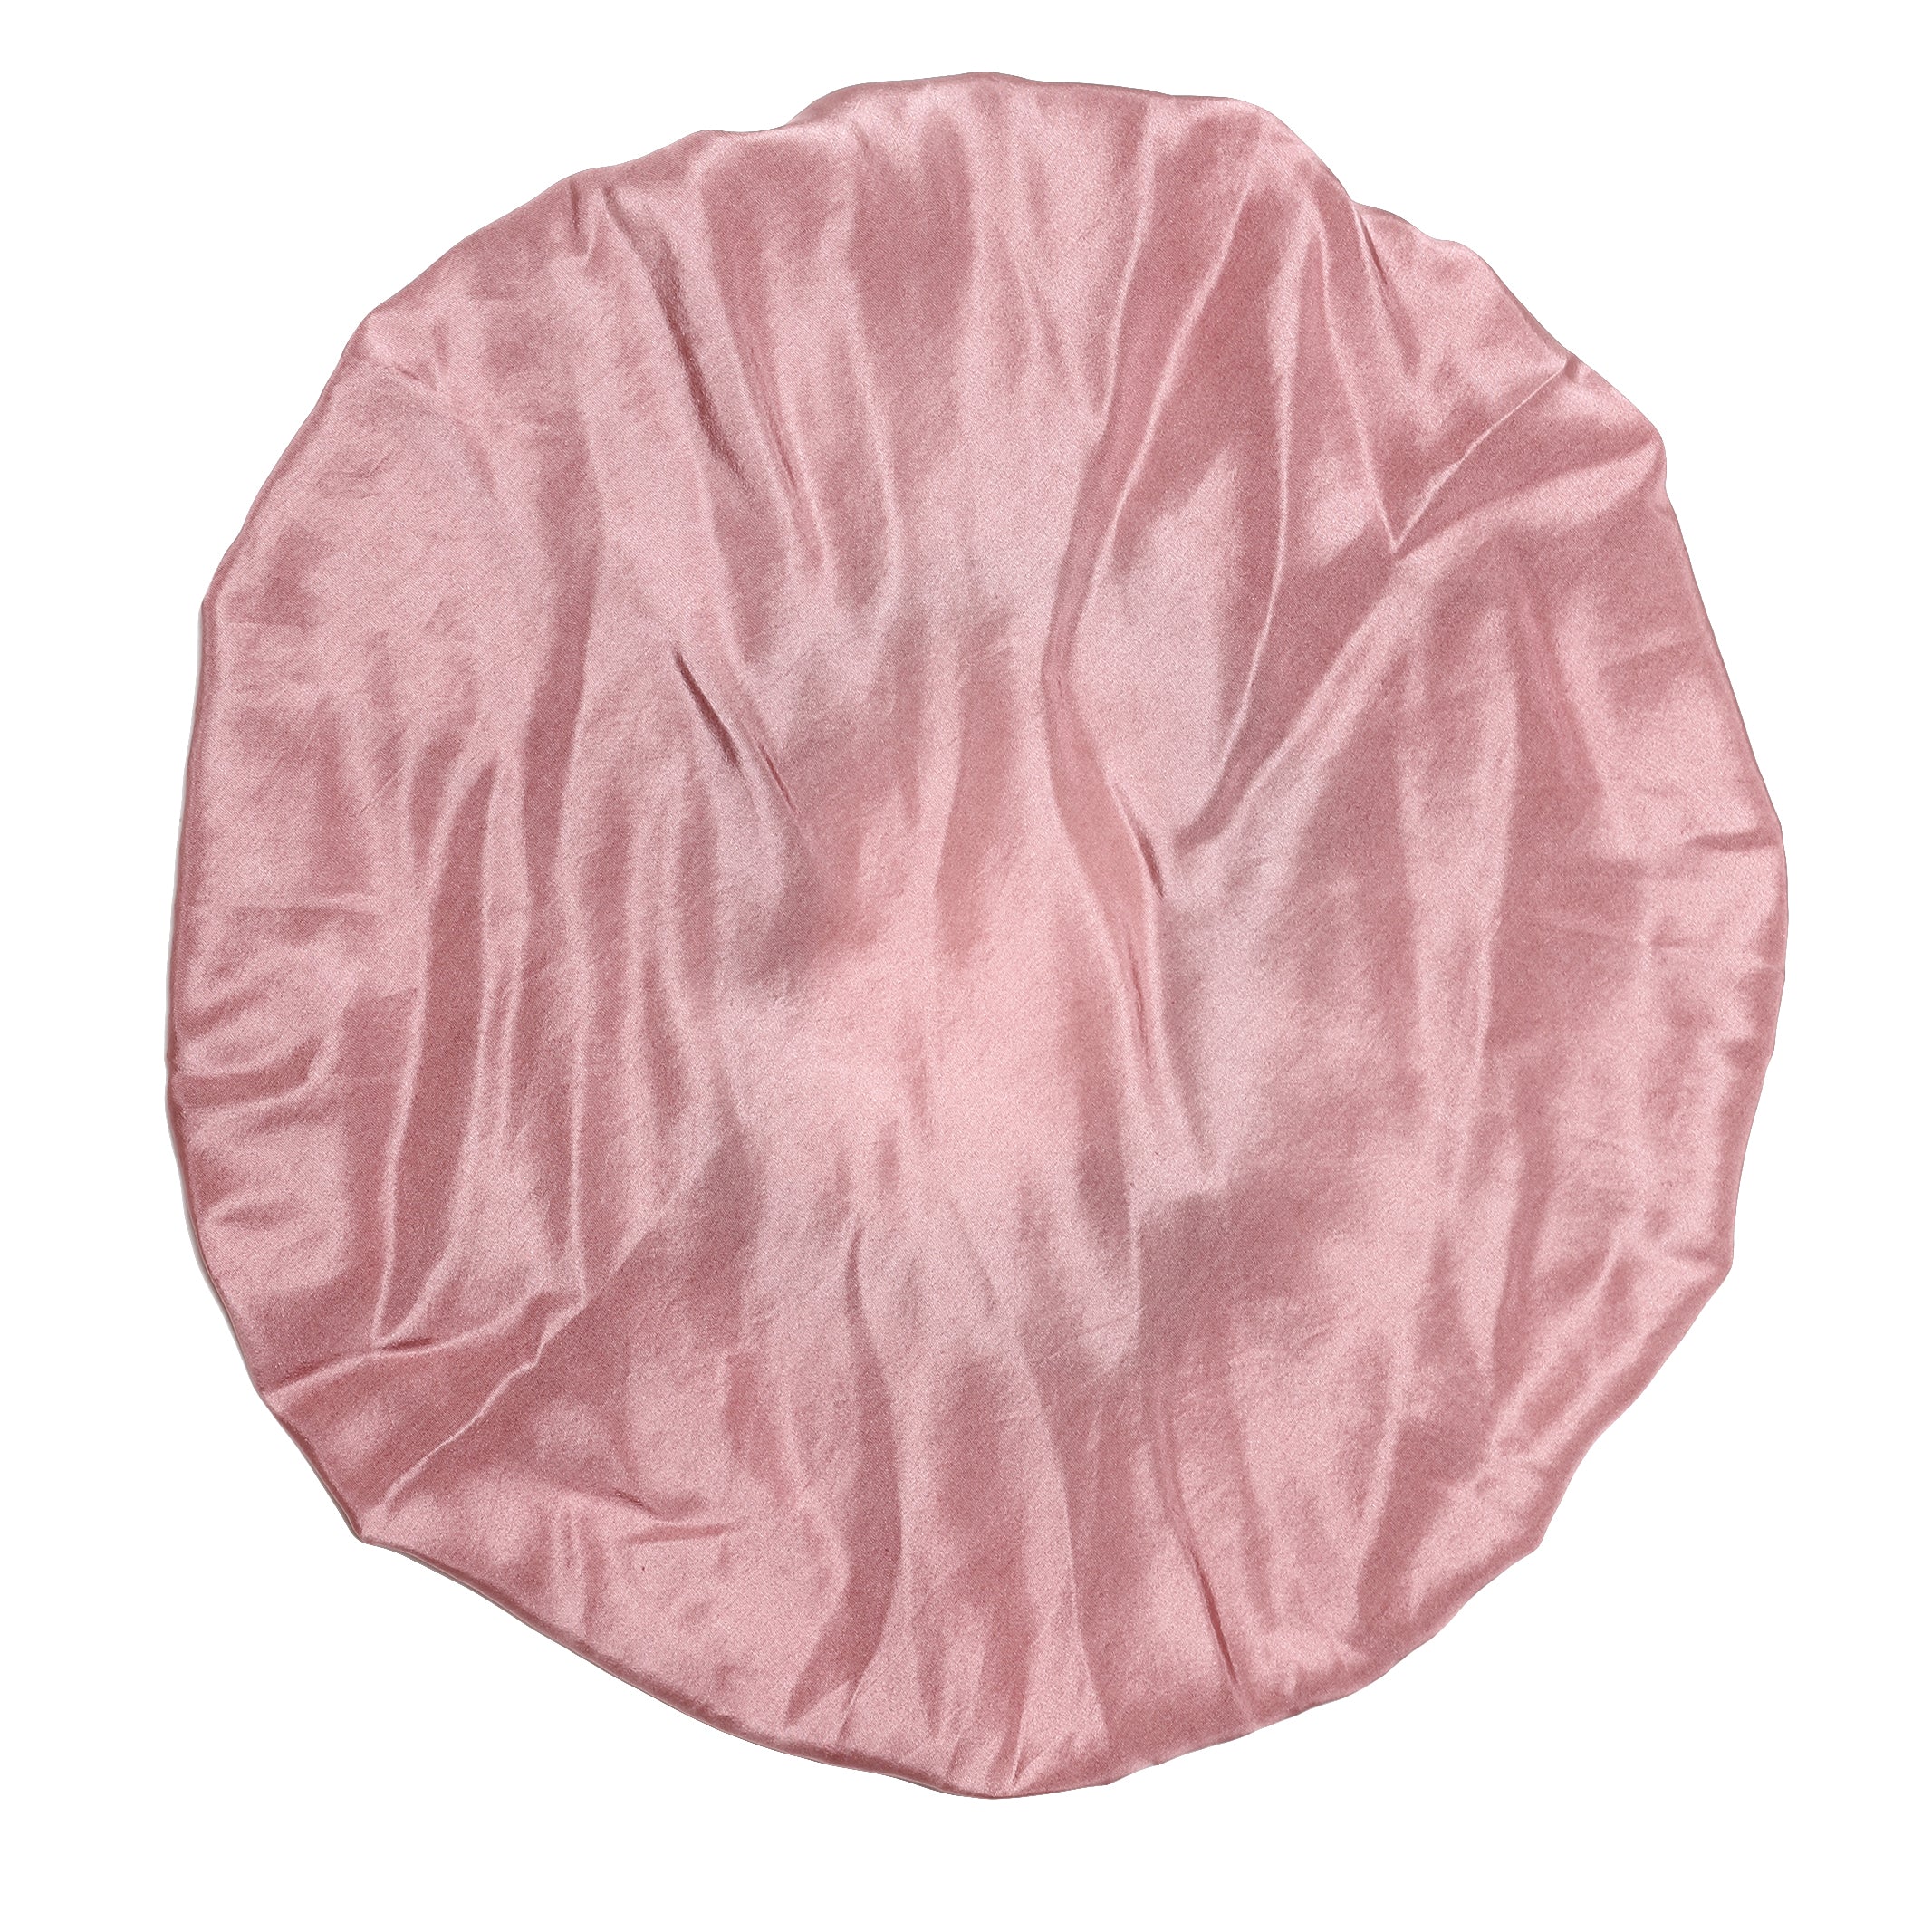 Satin Night Cap for Women  Large Silk Bonnet for Sleeping with Head Tie  Band  United Republic of Tanzania Shop